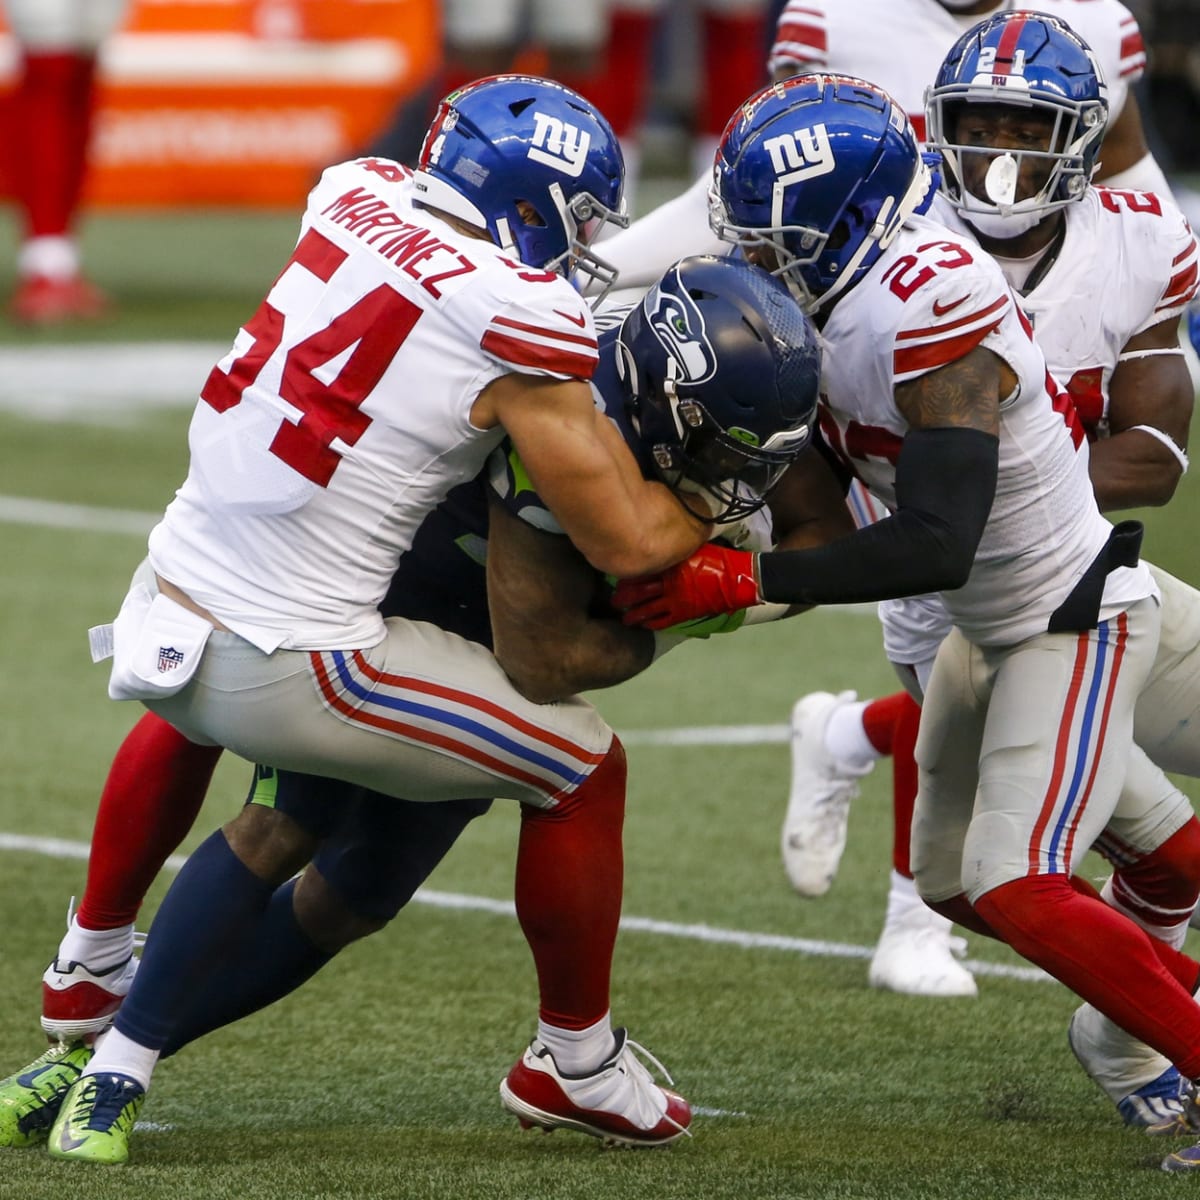 Giants Outmuscle Seahawks in Season's Biggest Upset - The New York Times